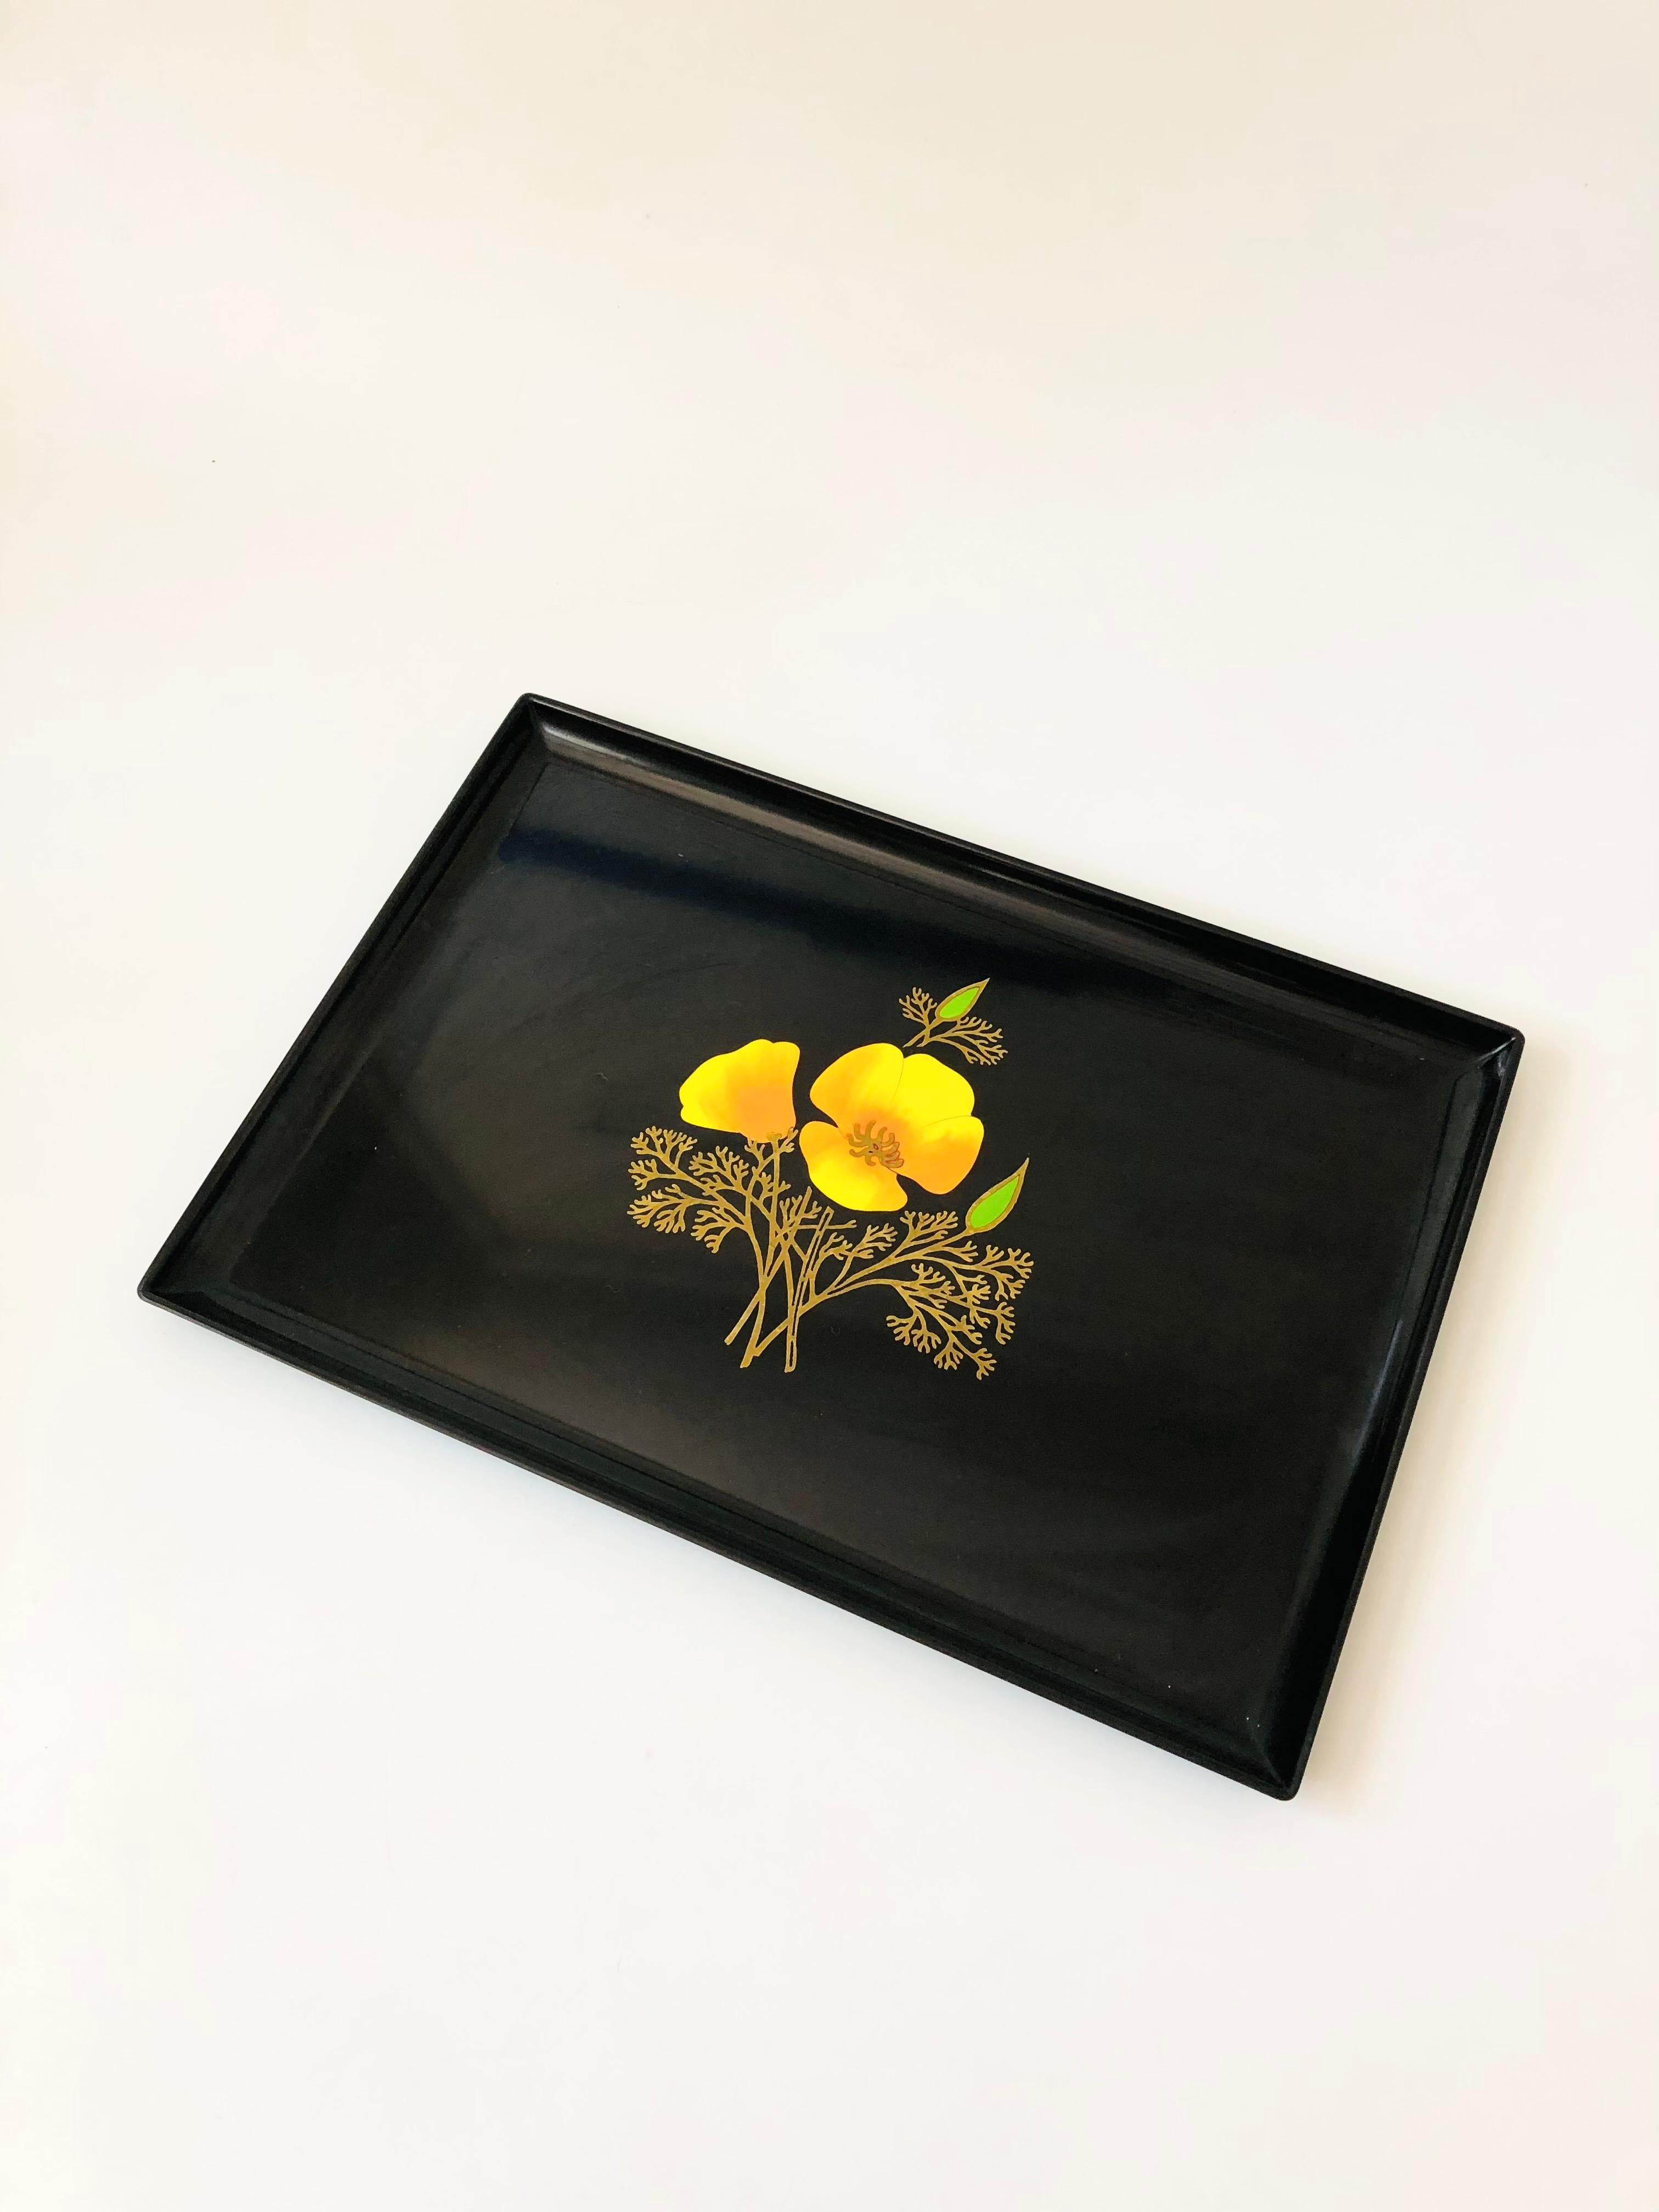 A large vintage rectangular resin tray. Decorated in the center with a California poppy outlined in brass. Made by Couroc, original stickers are on the back.

